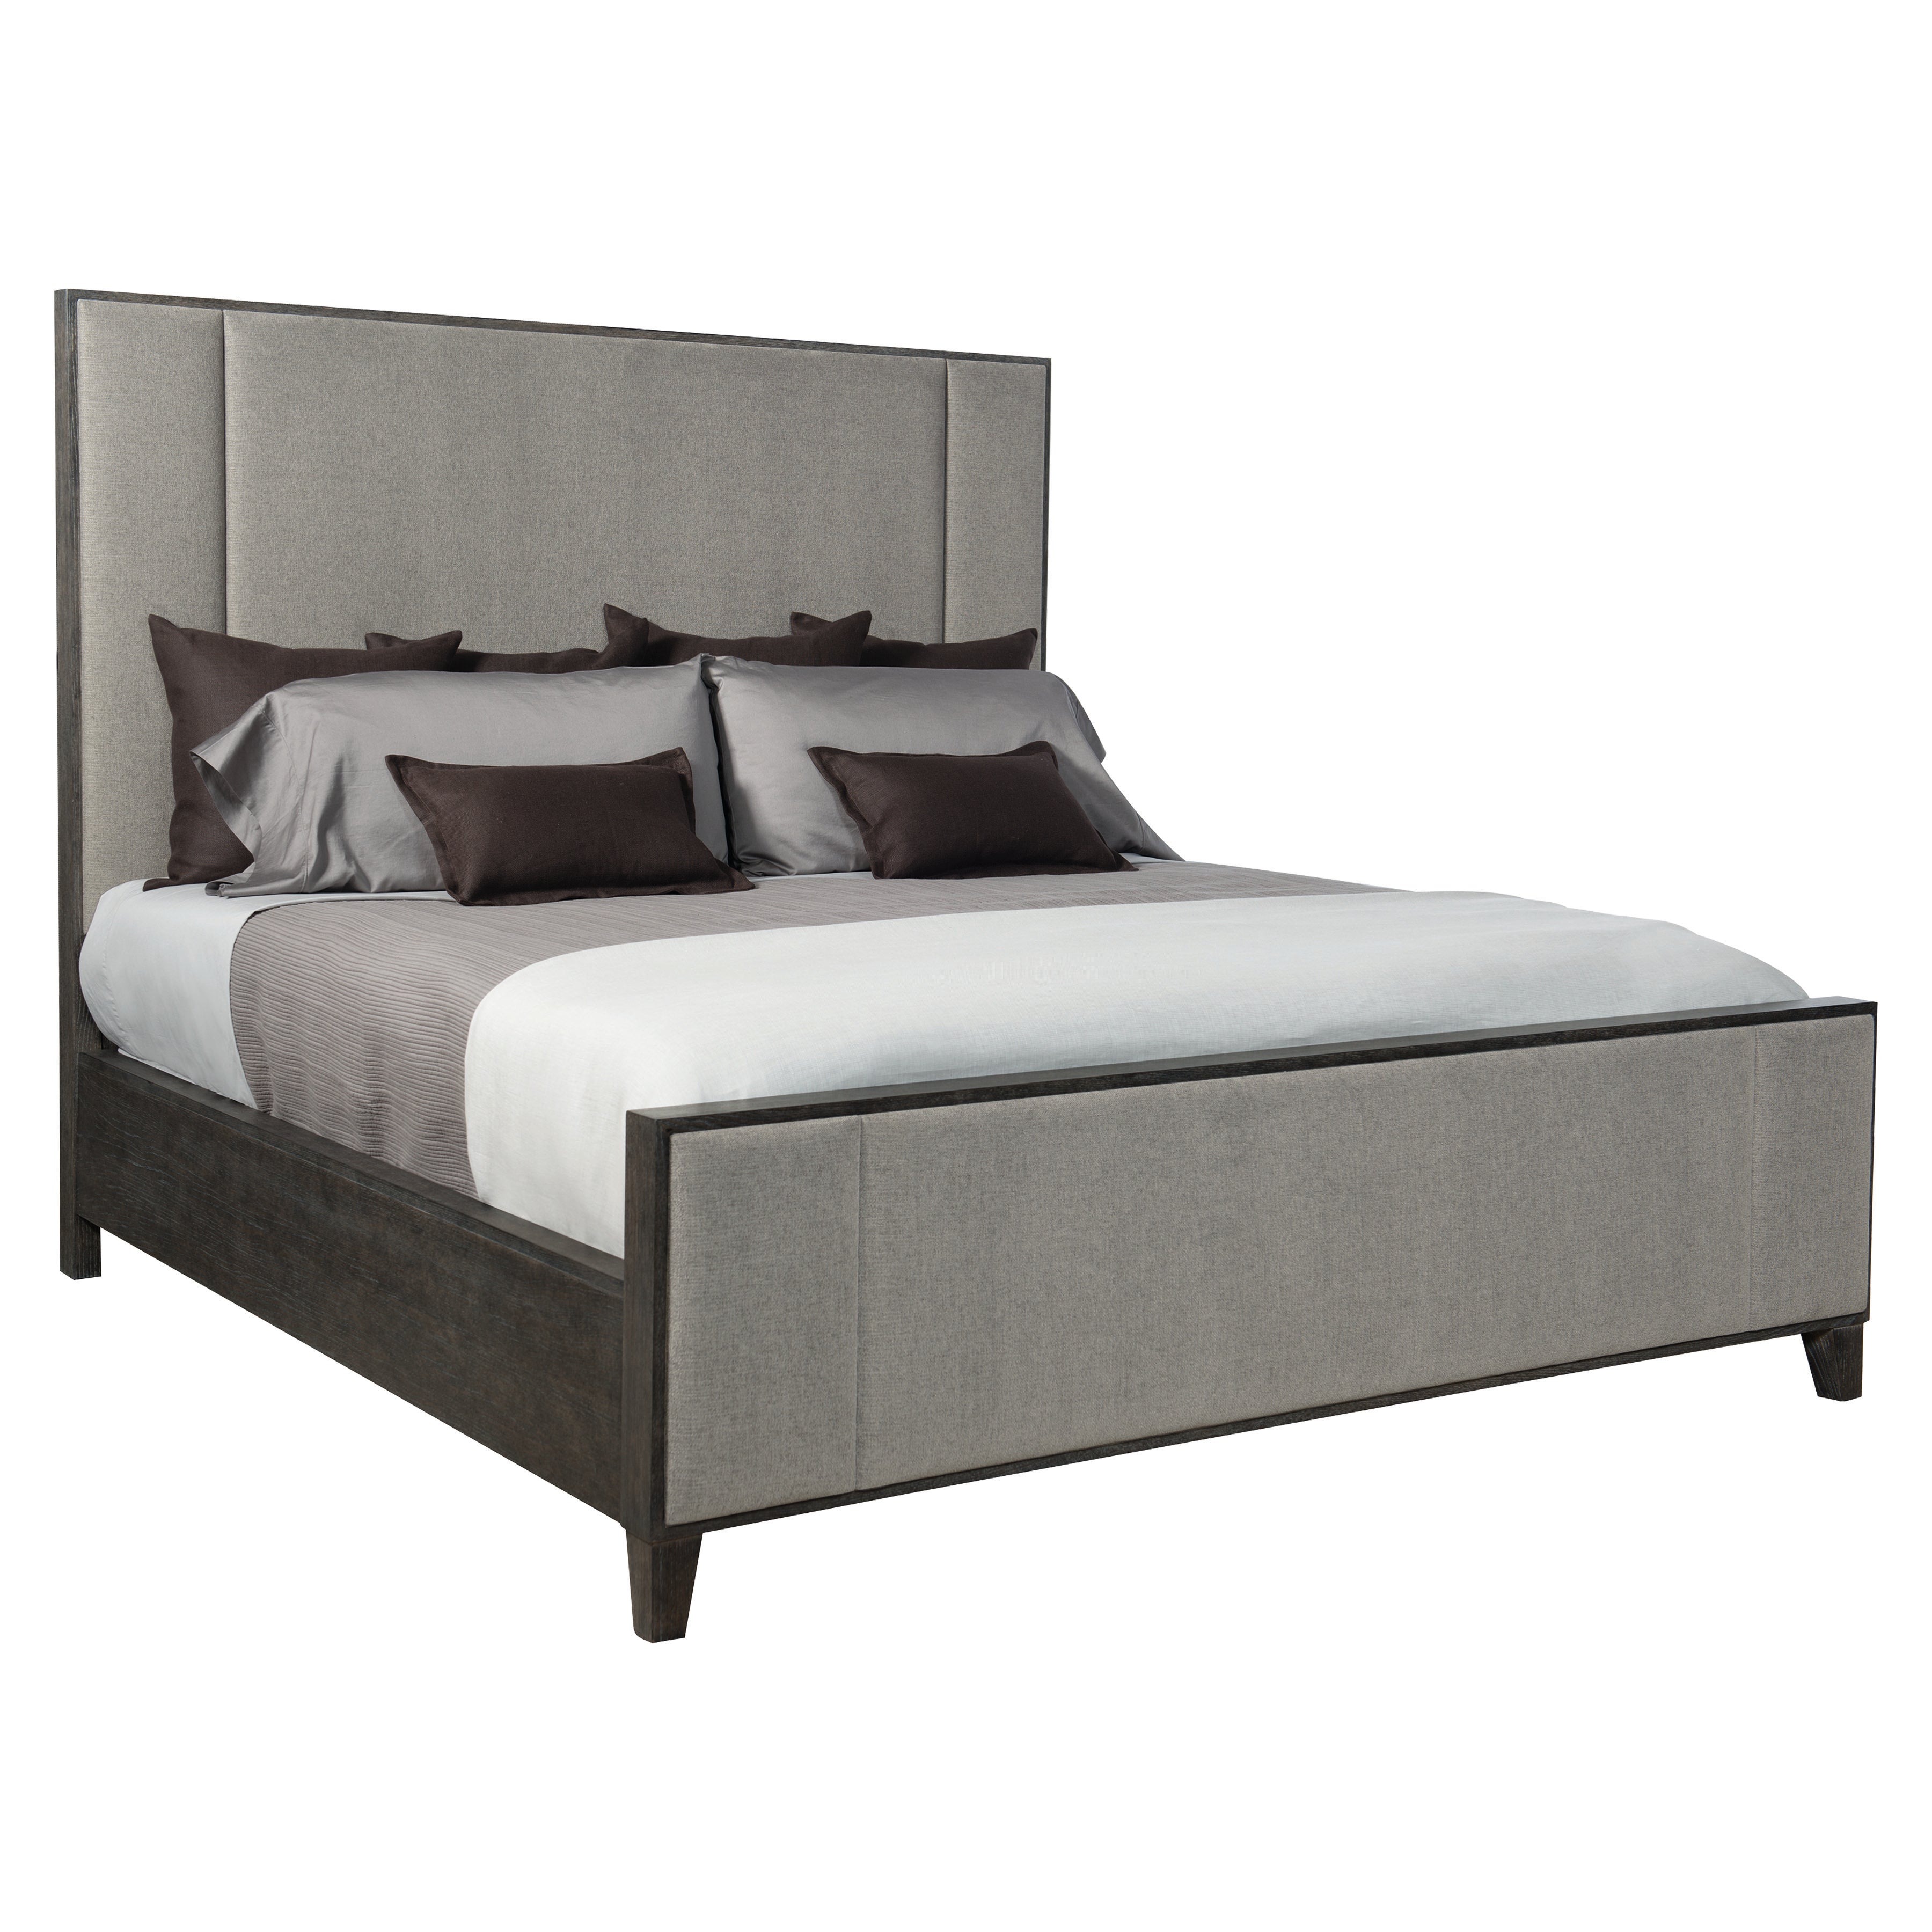 Linea King Panel Bed with Upholstered Headboard and Footboard in Cerused Charcoal Finish